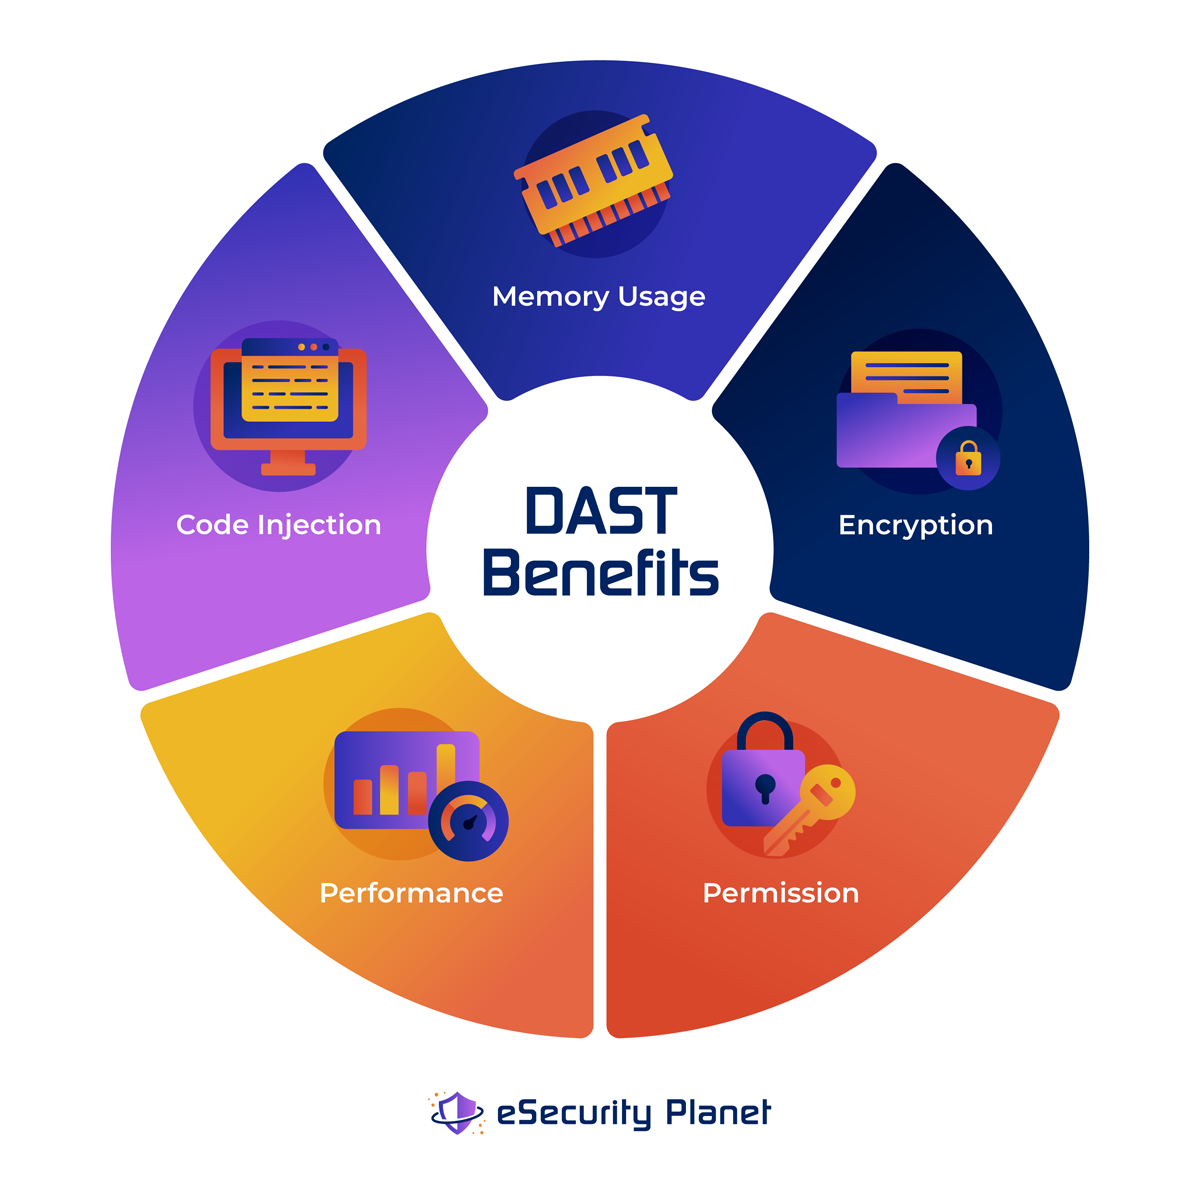 DAST benefits infographic by eSecurity Planet.